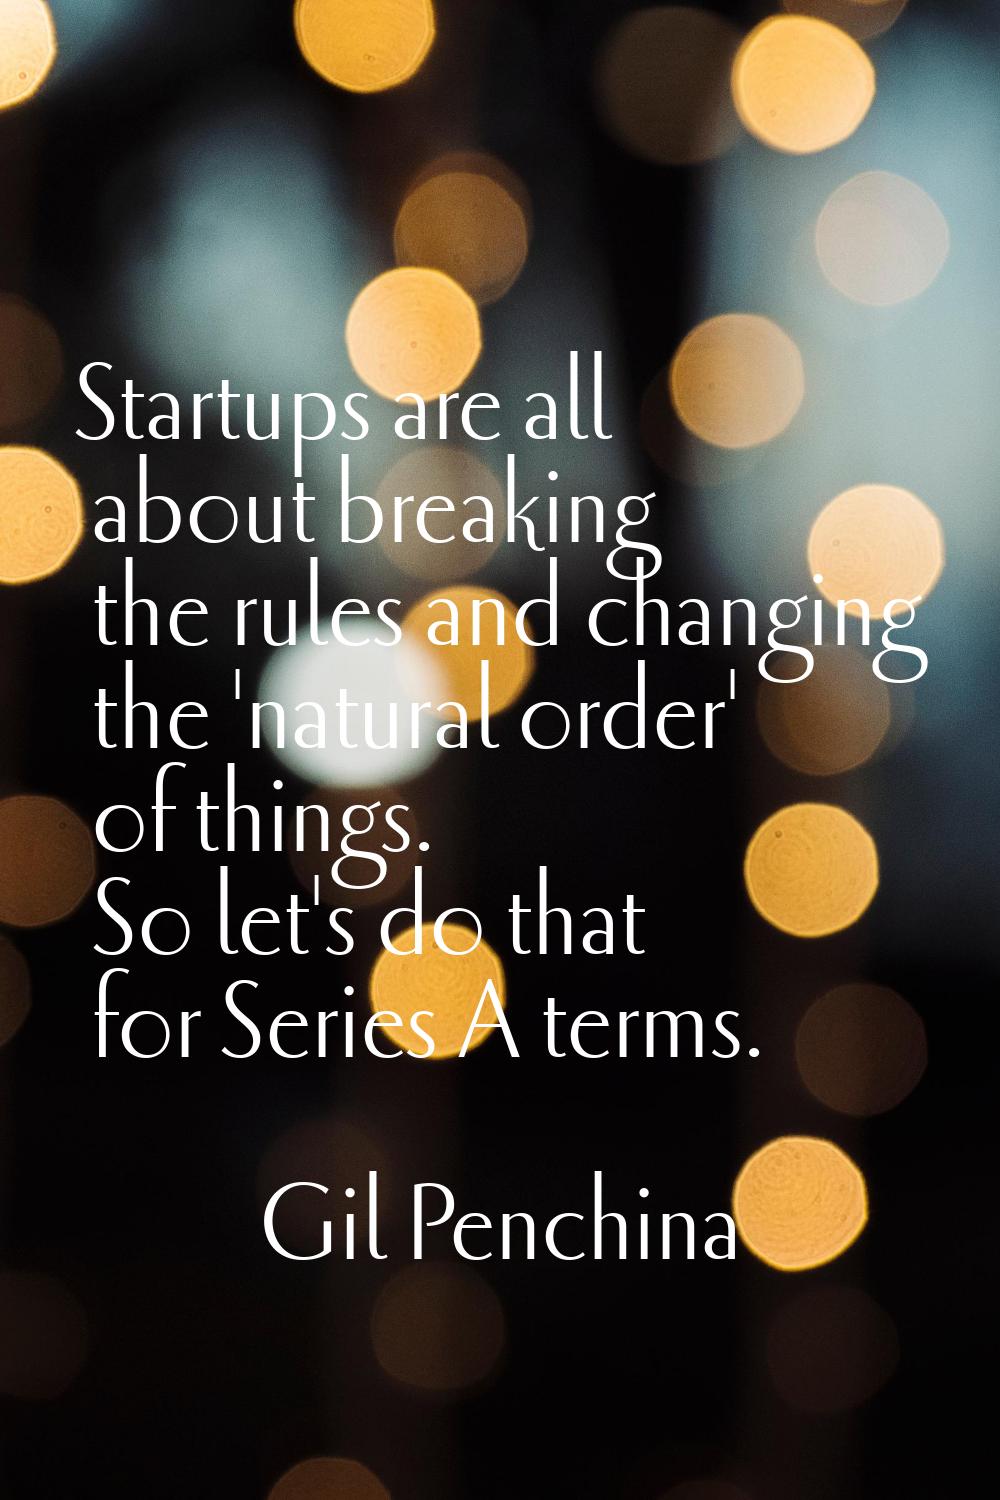 Startups are all about breaking the rules and changing the 'natural order' of things. So let's do t